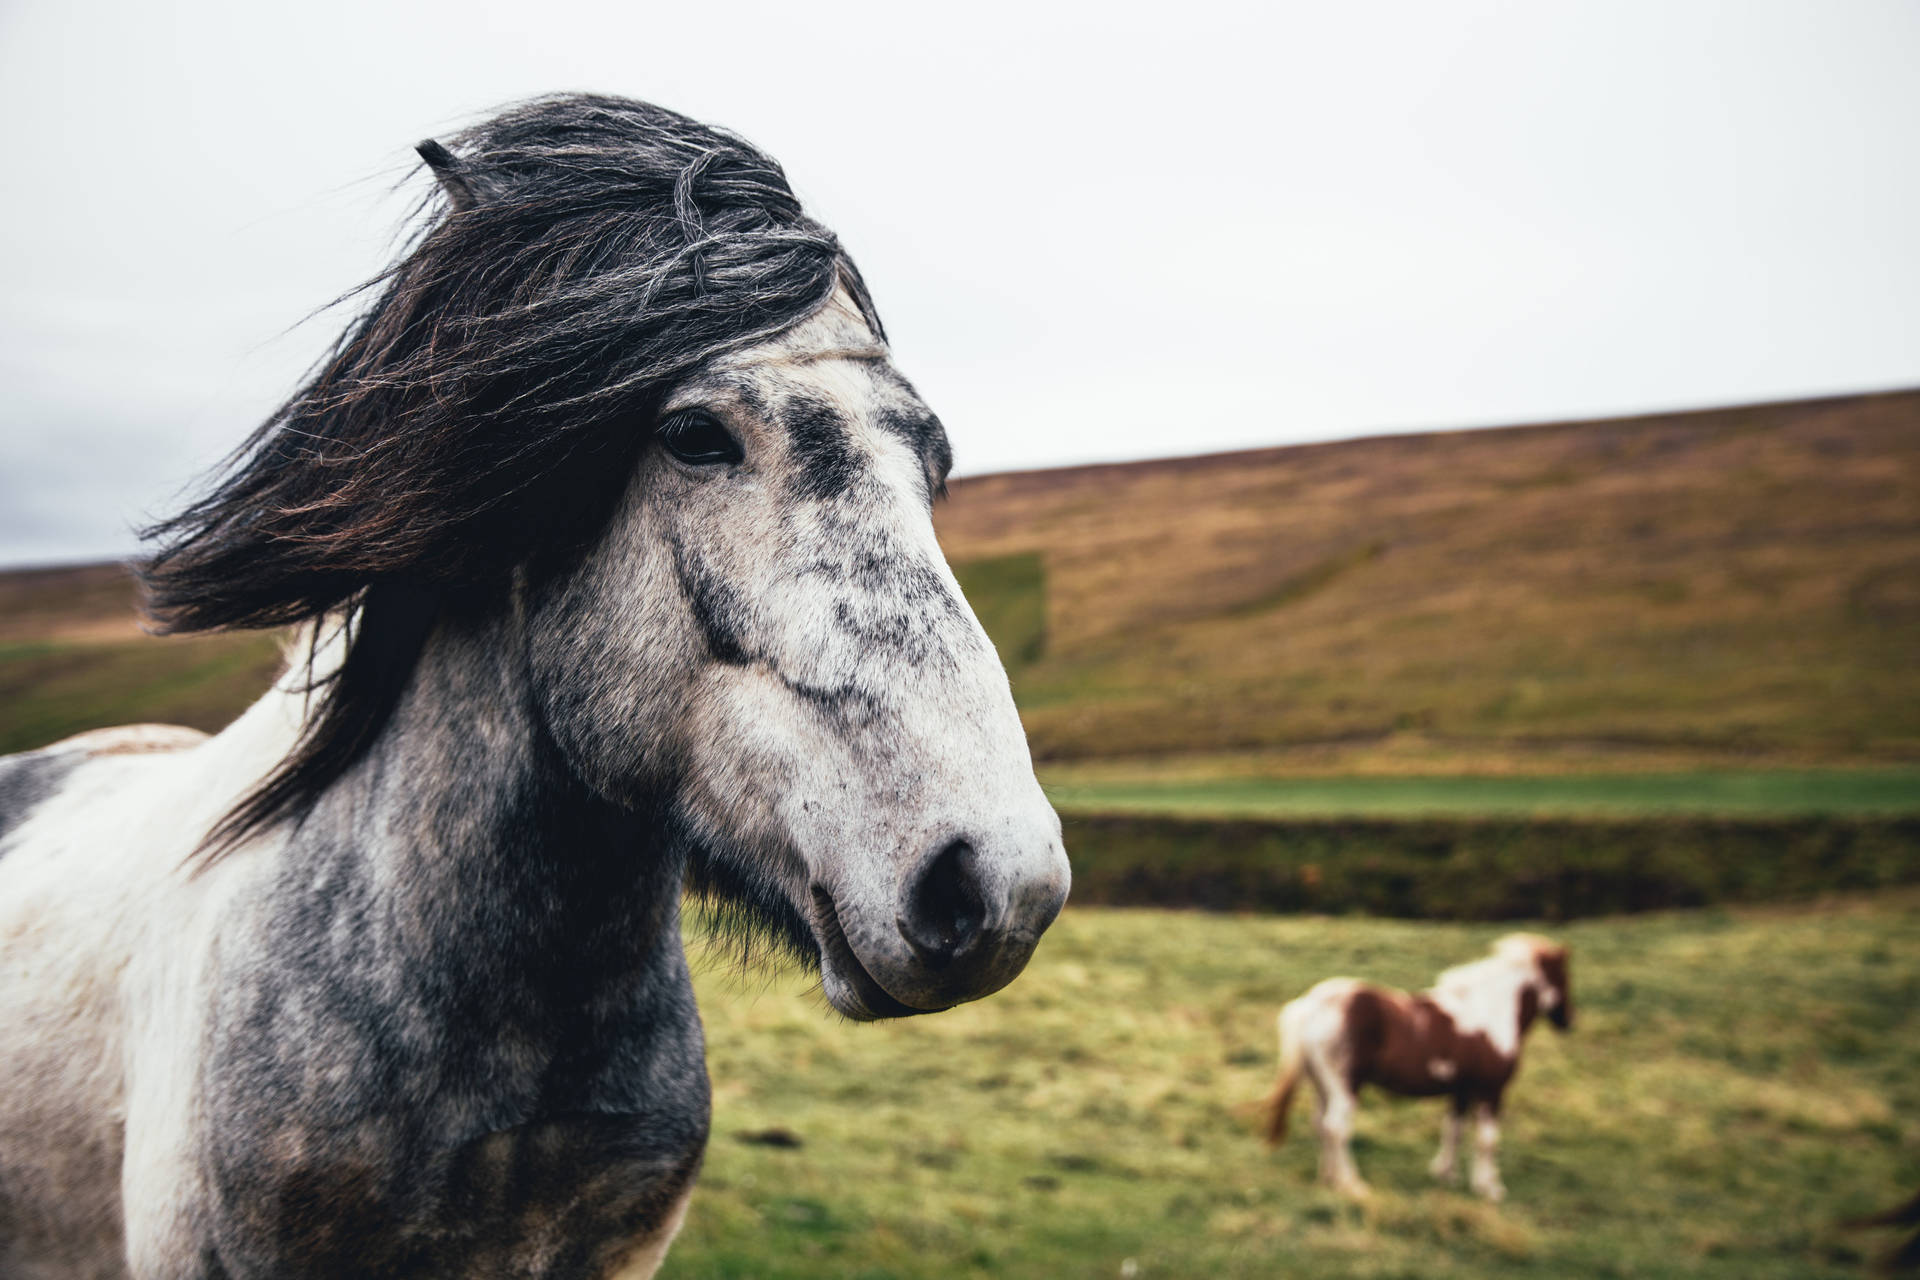 A horse trots through the windy countryside Wallpaper